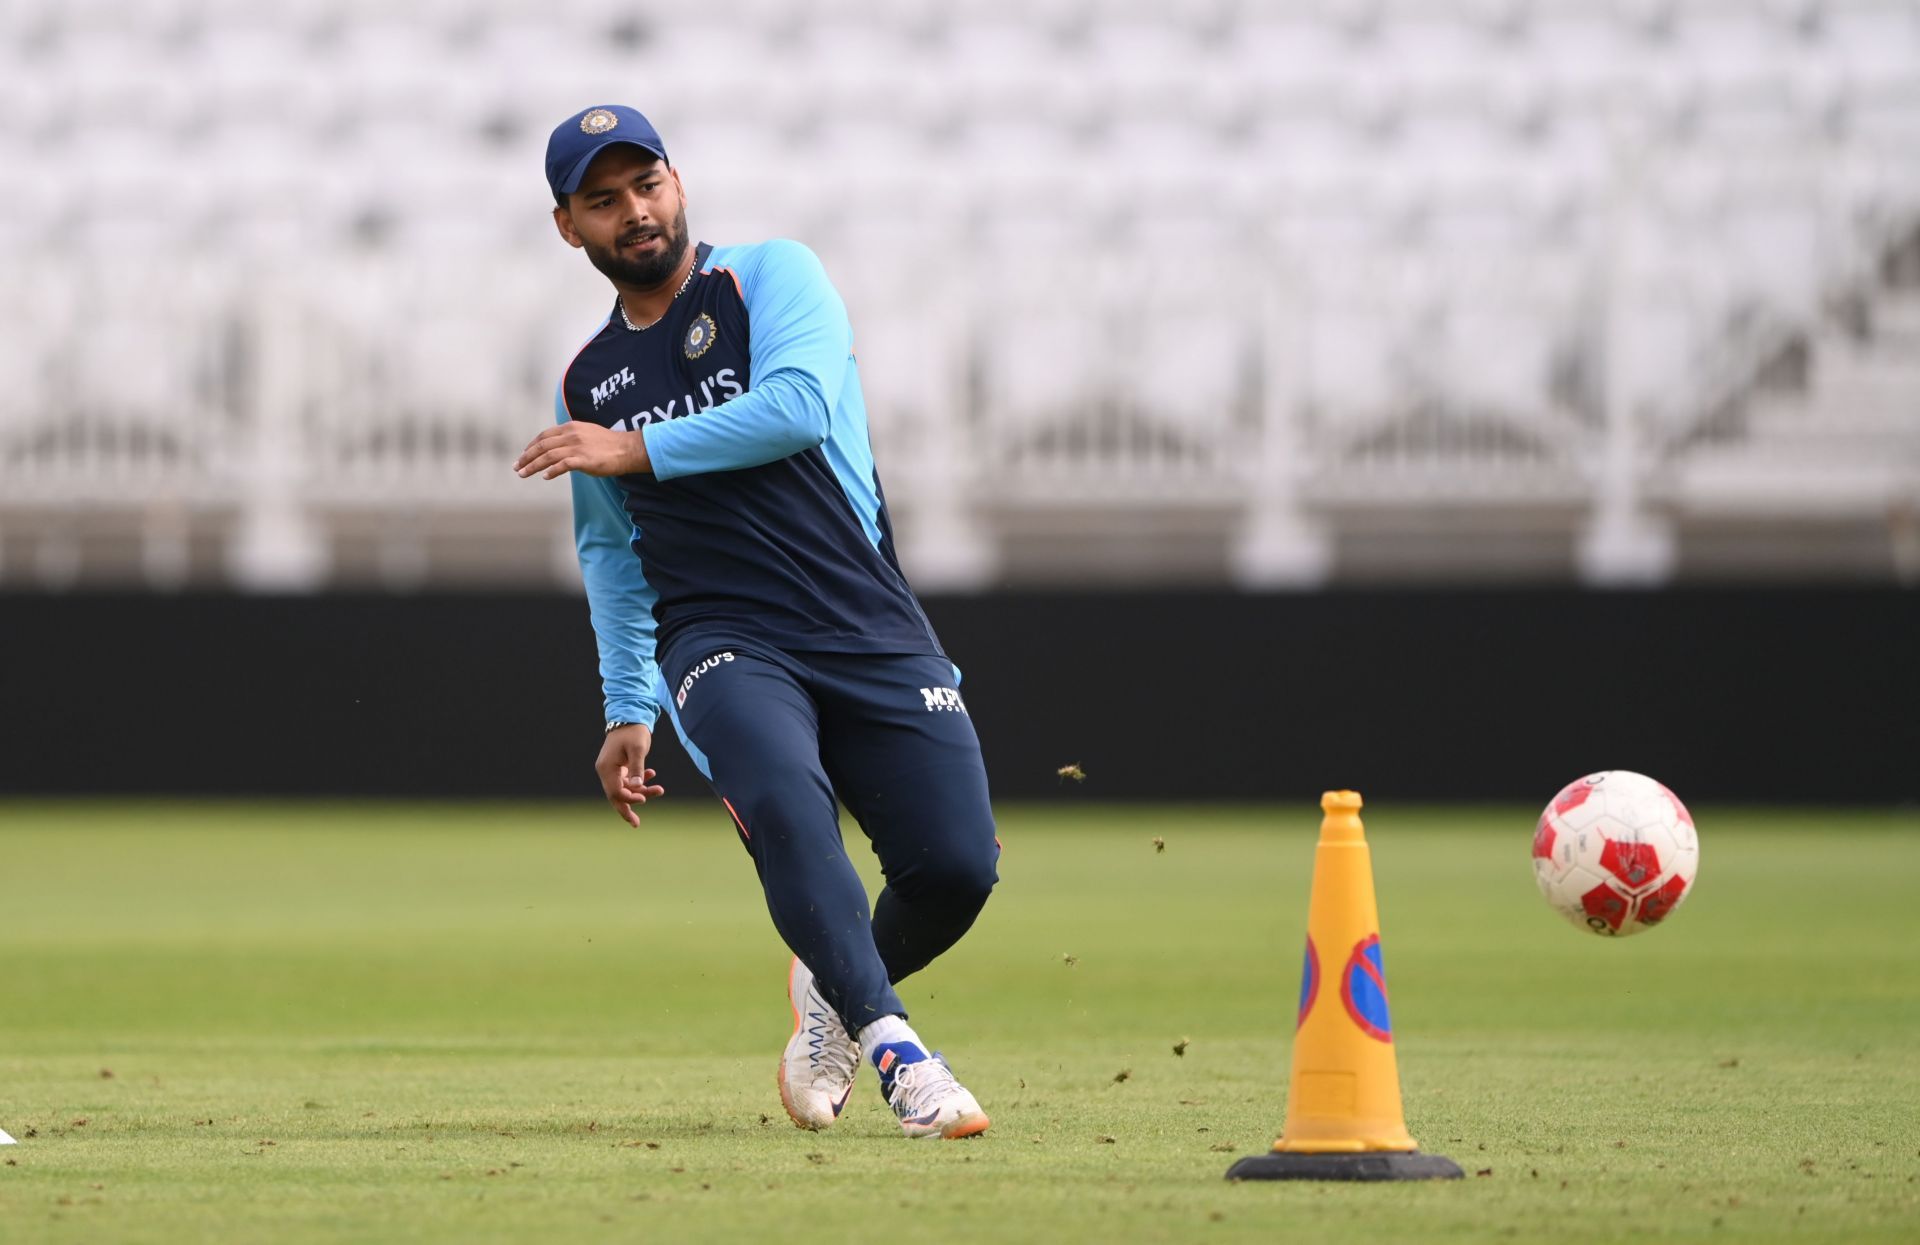 Rishabh Pant might be rested for the 3rd T20I